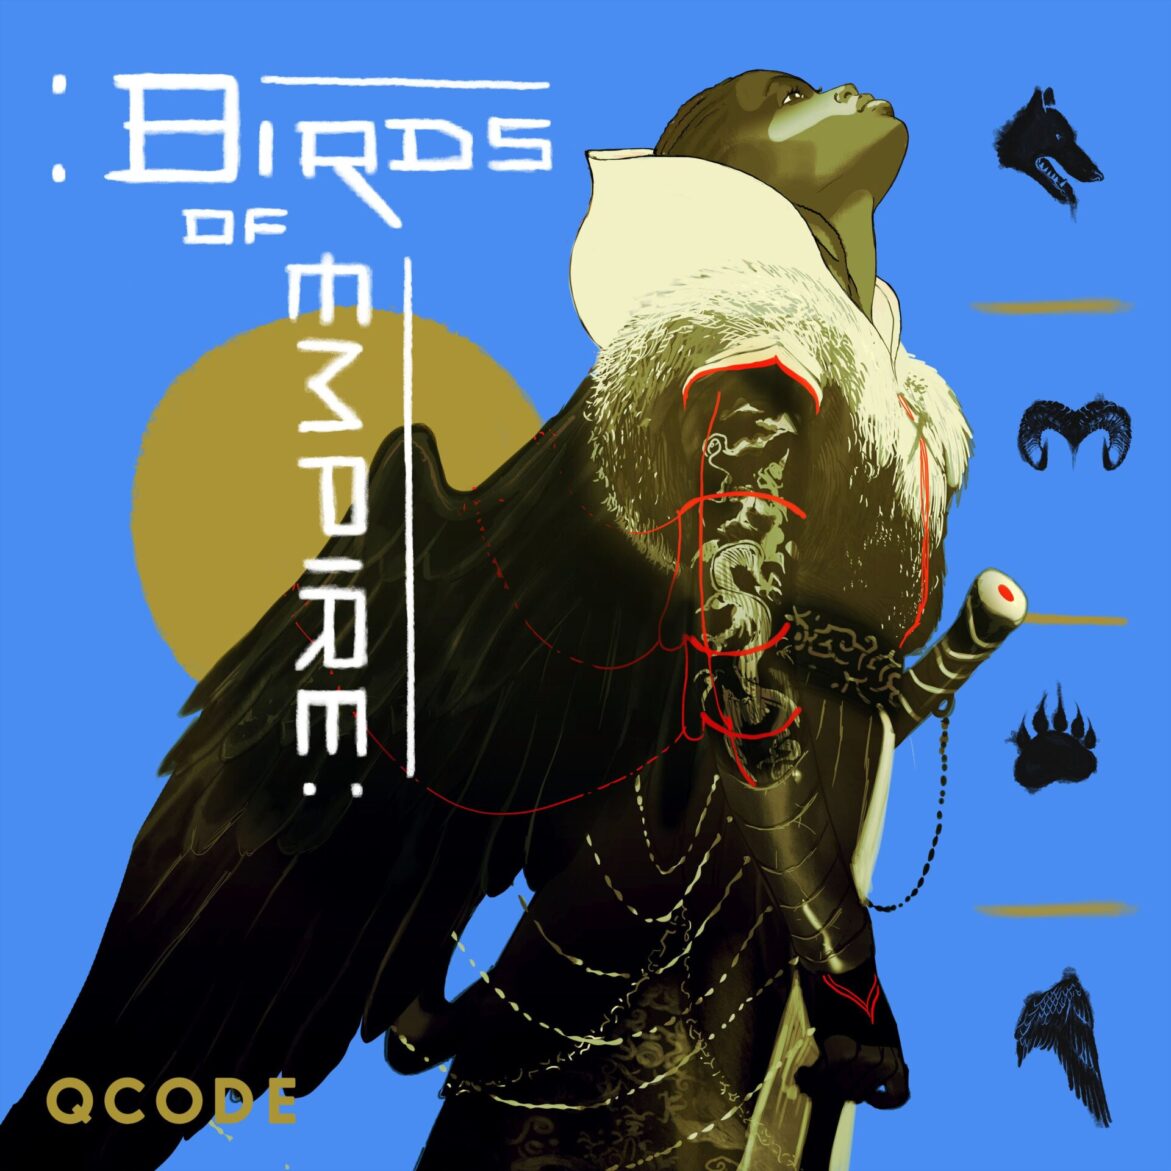 Black Podcasting - Preview: Birds of Empire — an immersive tale of history, fantasy, and myth